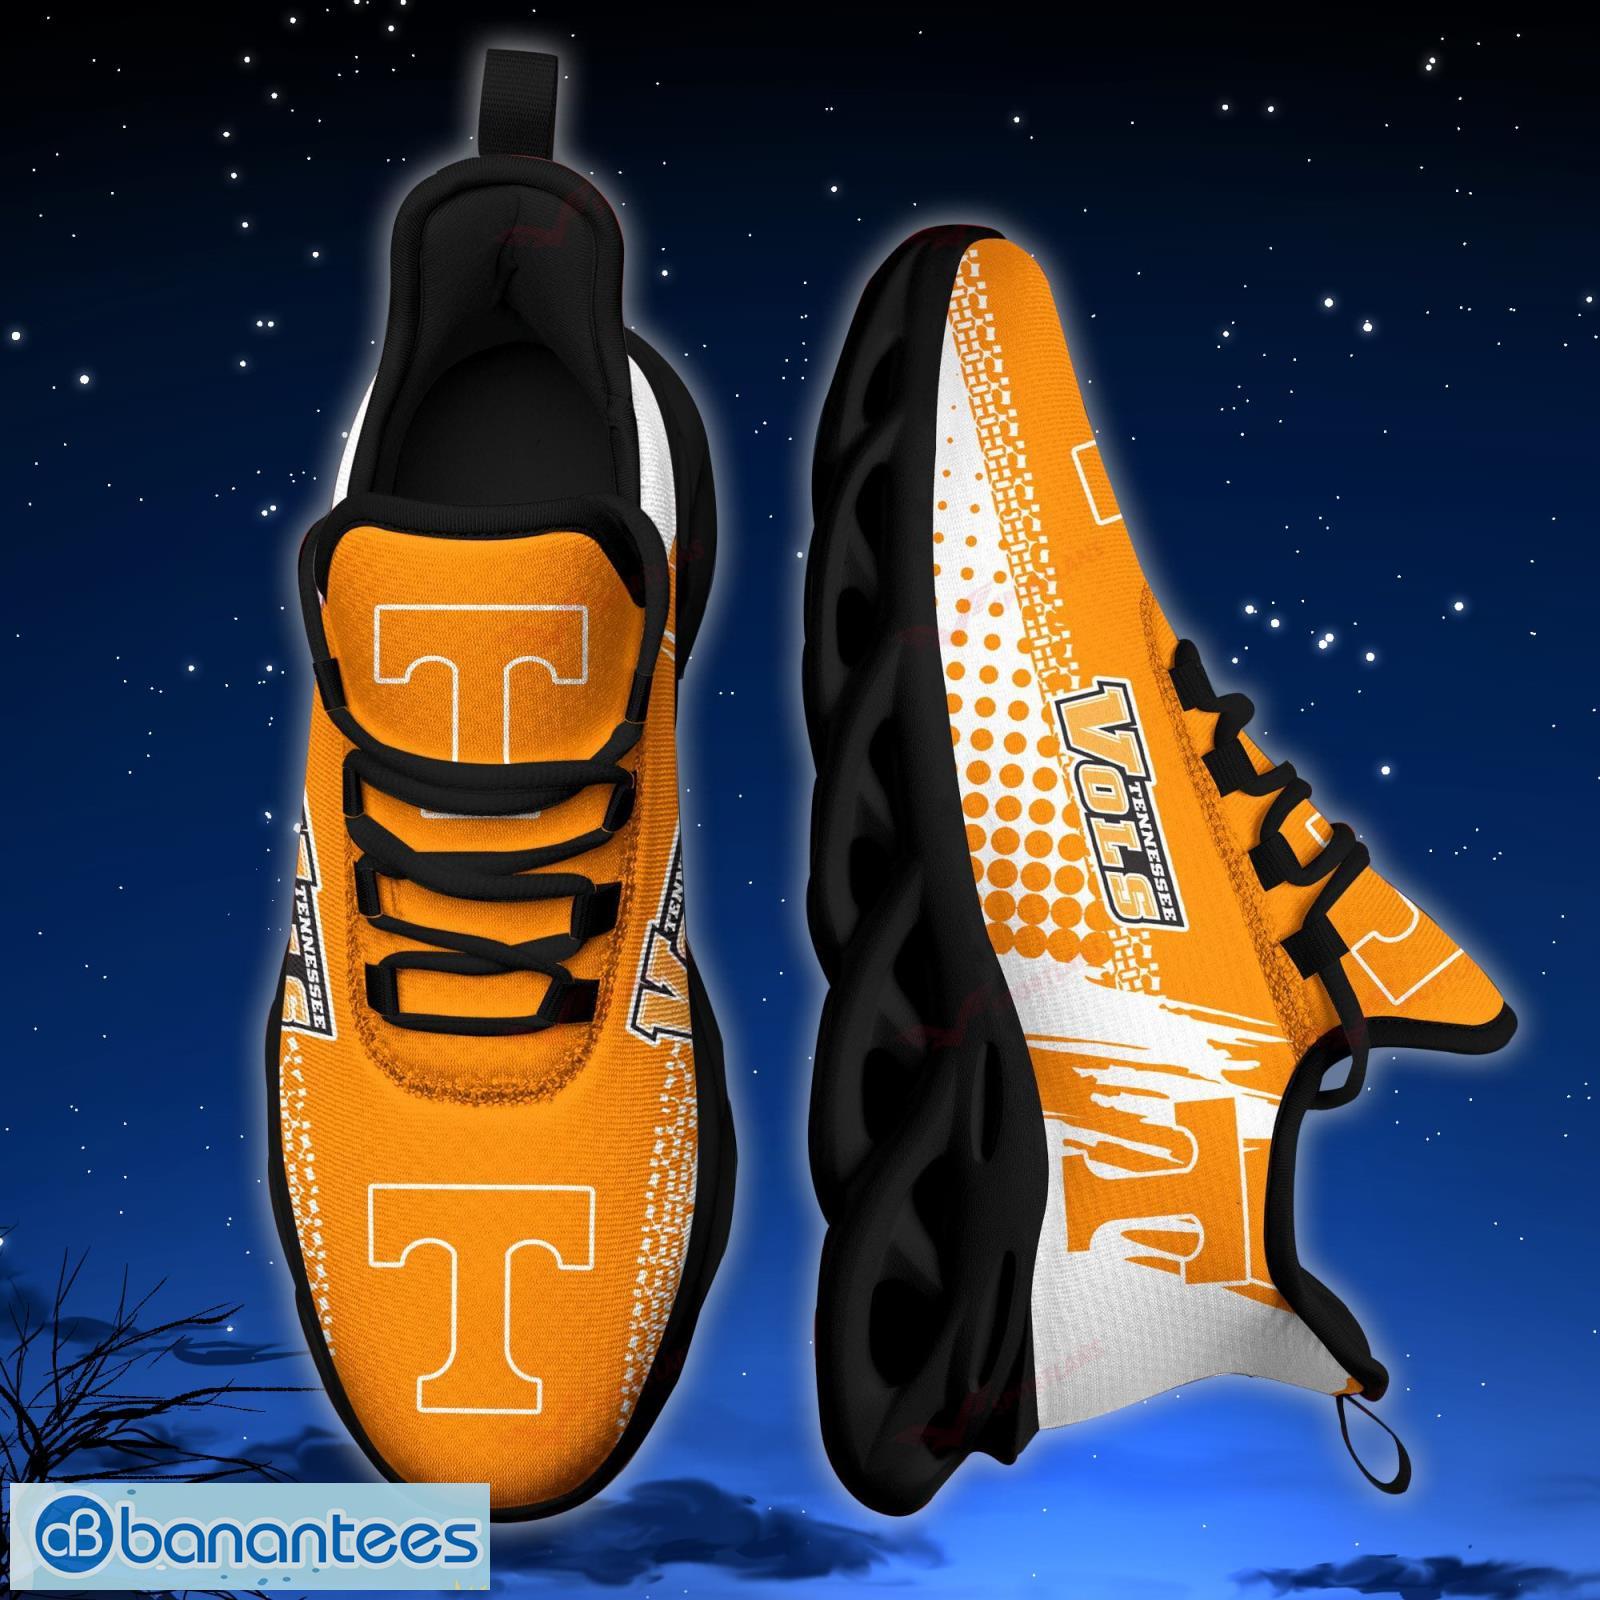 Tn Vols Nike Shoes: Get Game-Day Ready Sneakers!